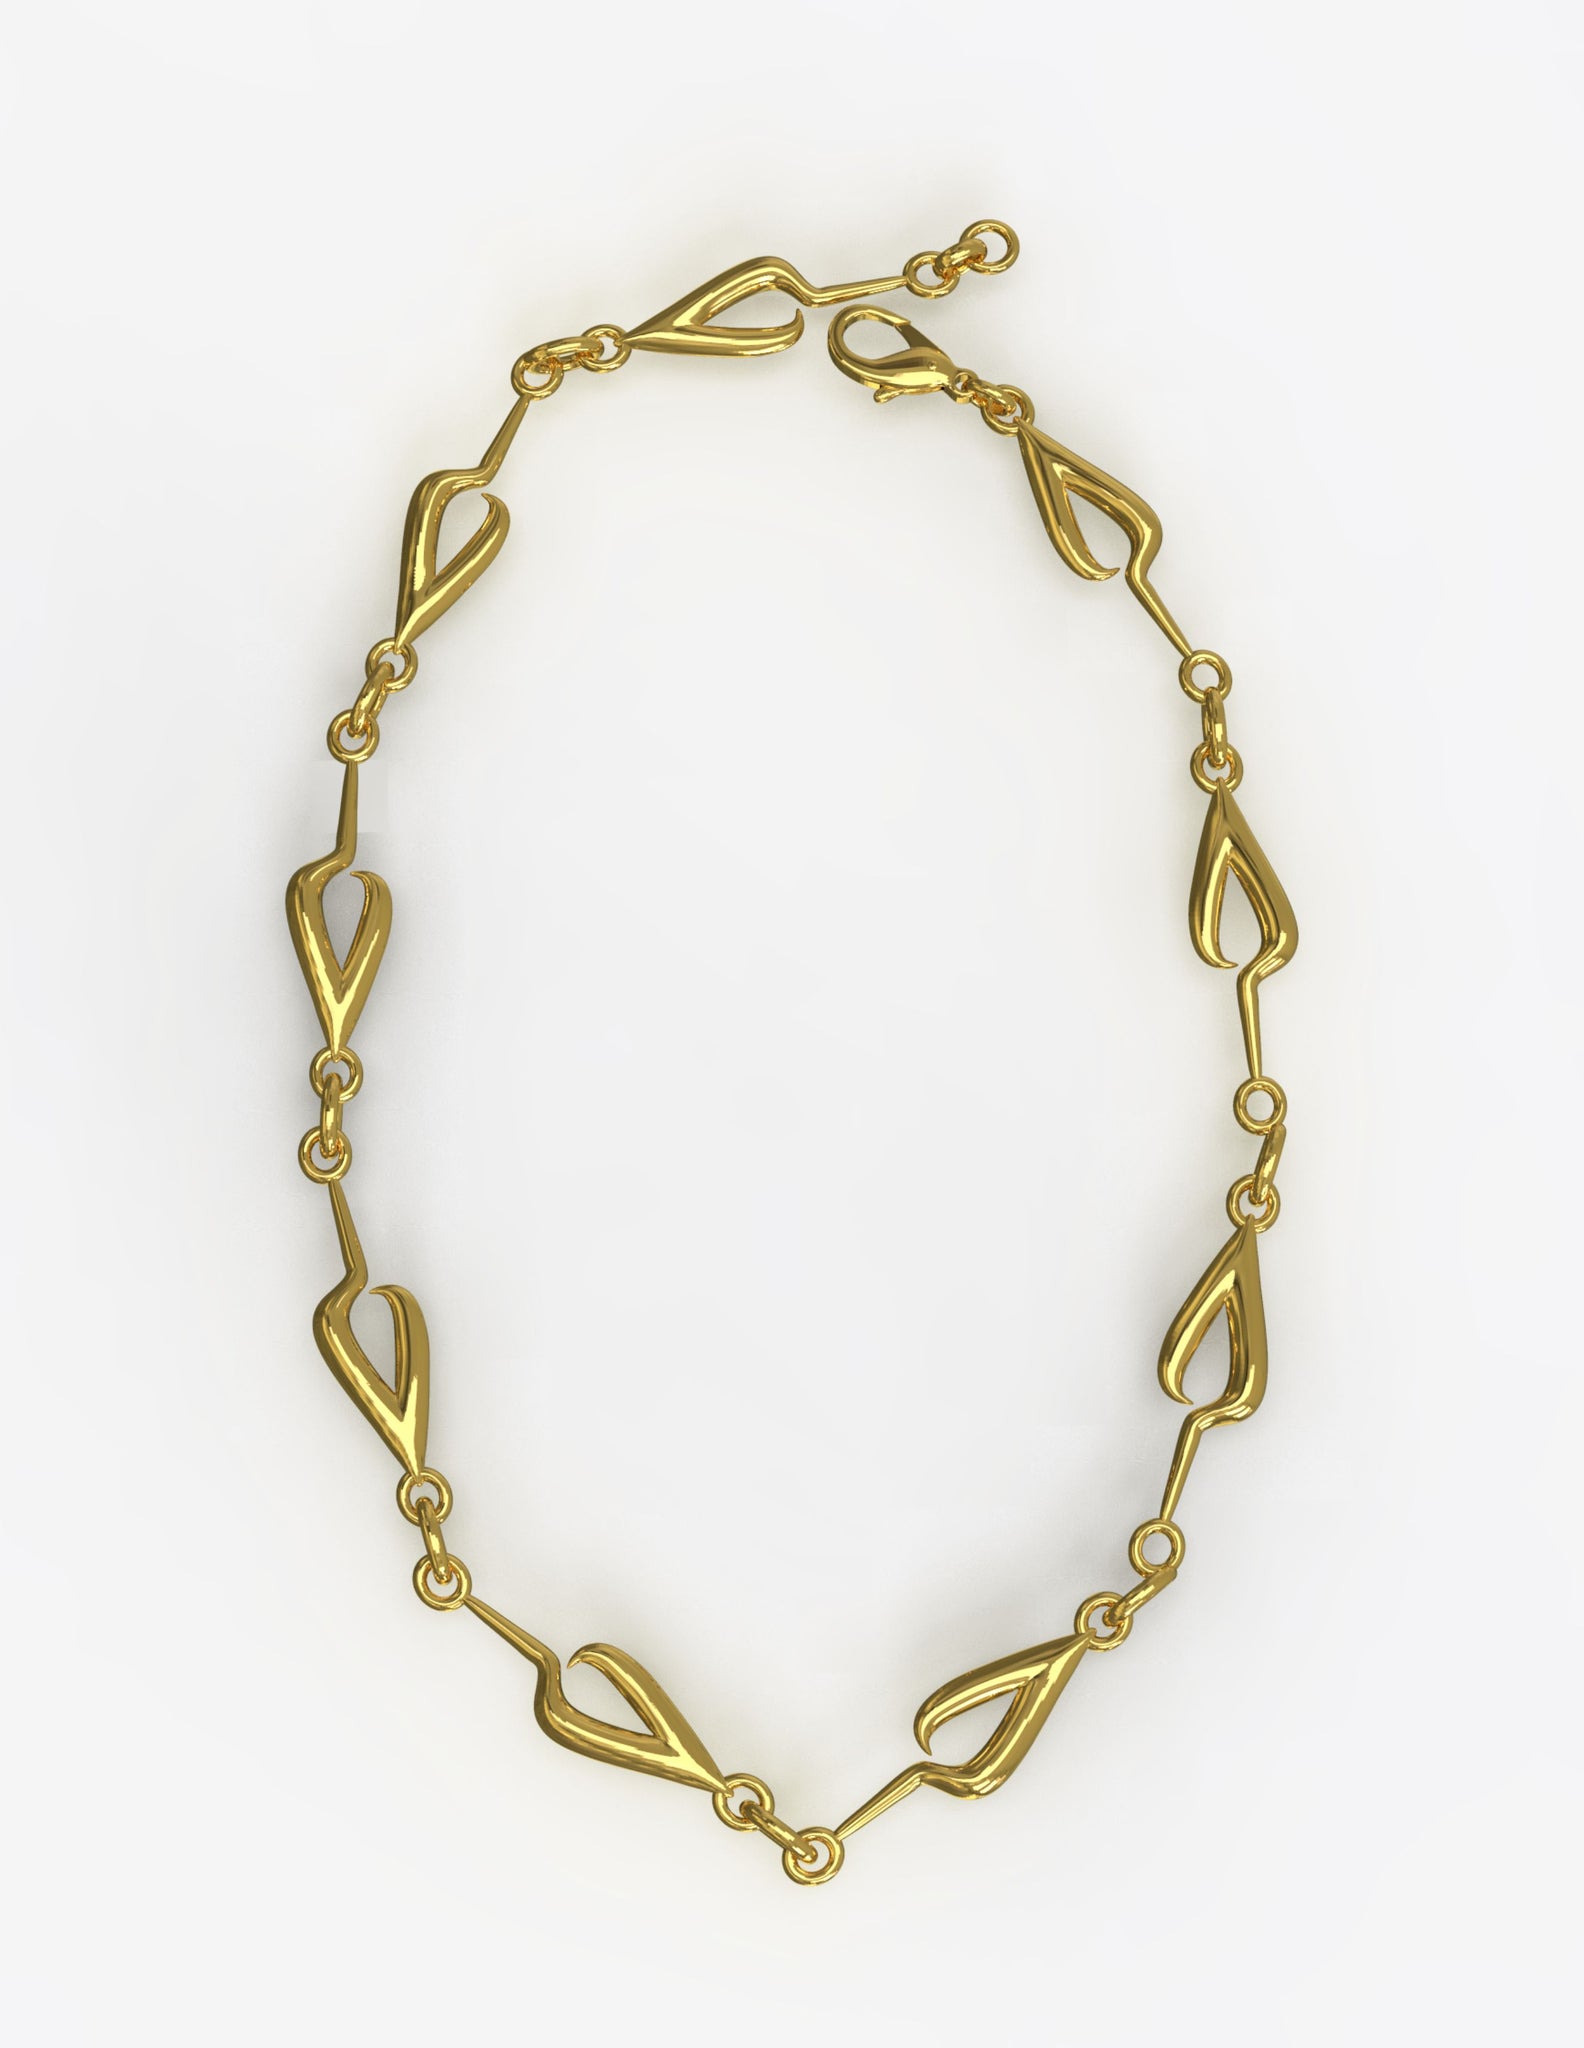 Iklwa Link Chain in Polished Gold Vermeil